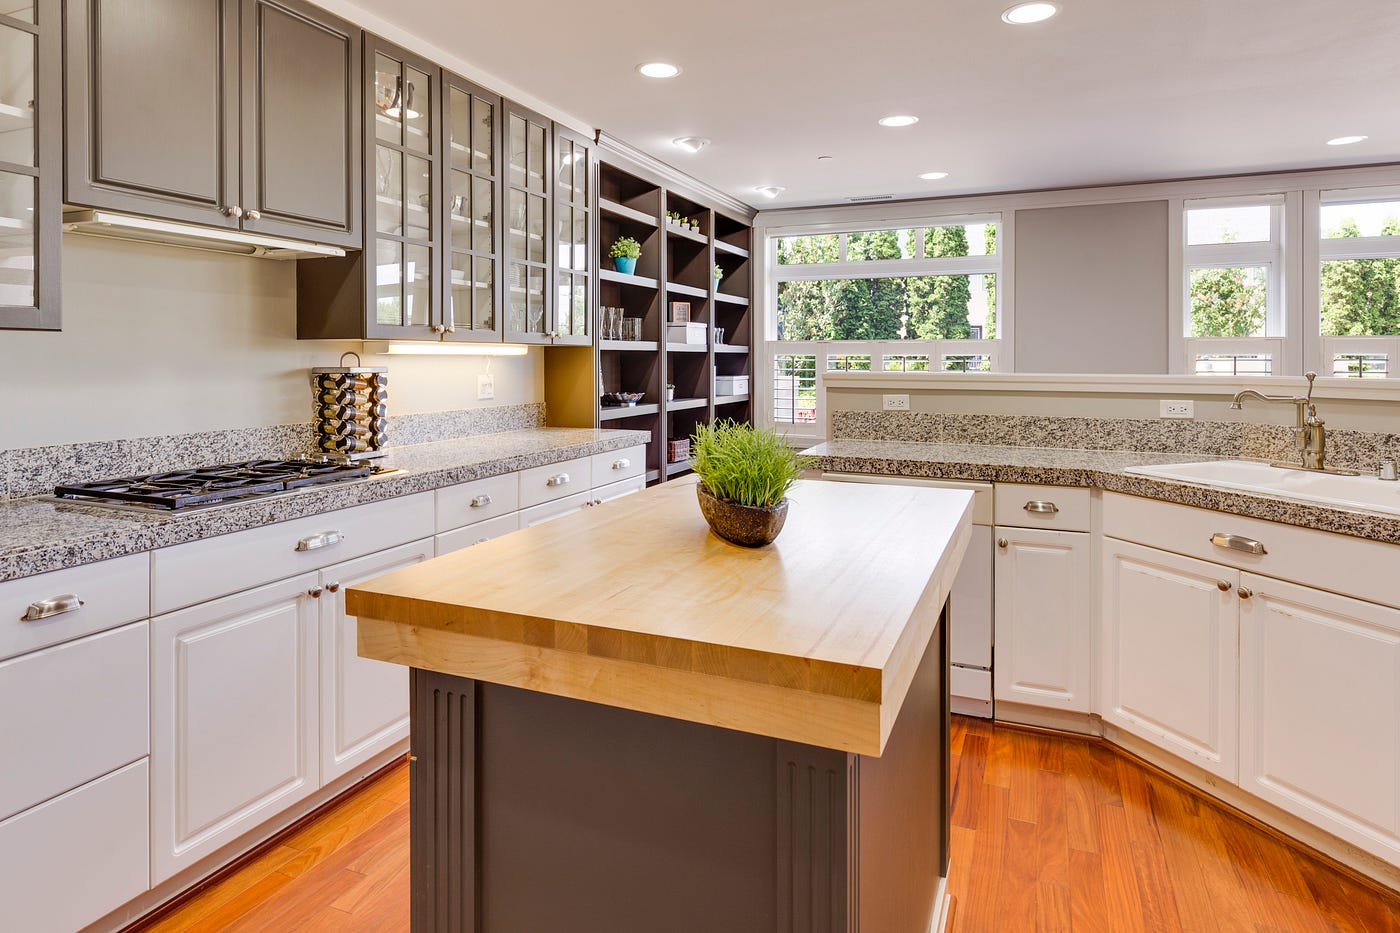 How to Disinfect Kitchen Countertops the Right Way